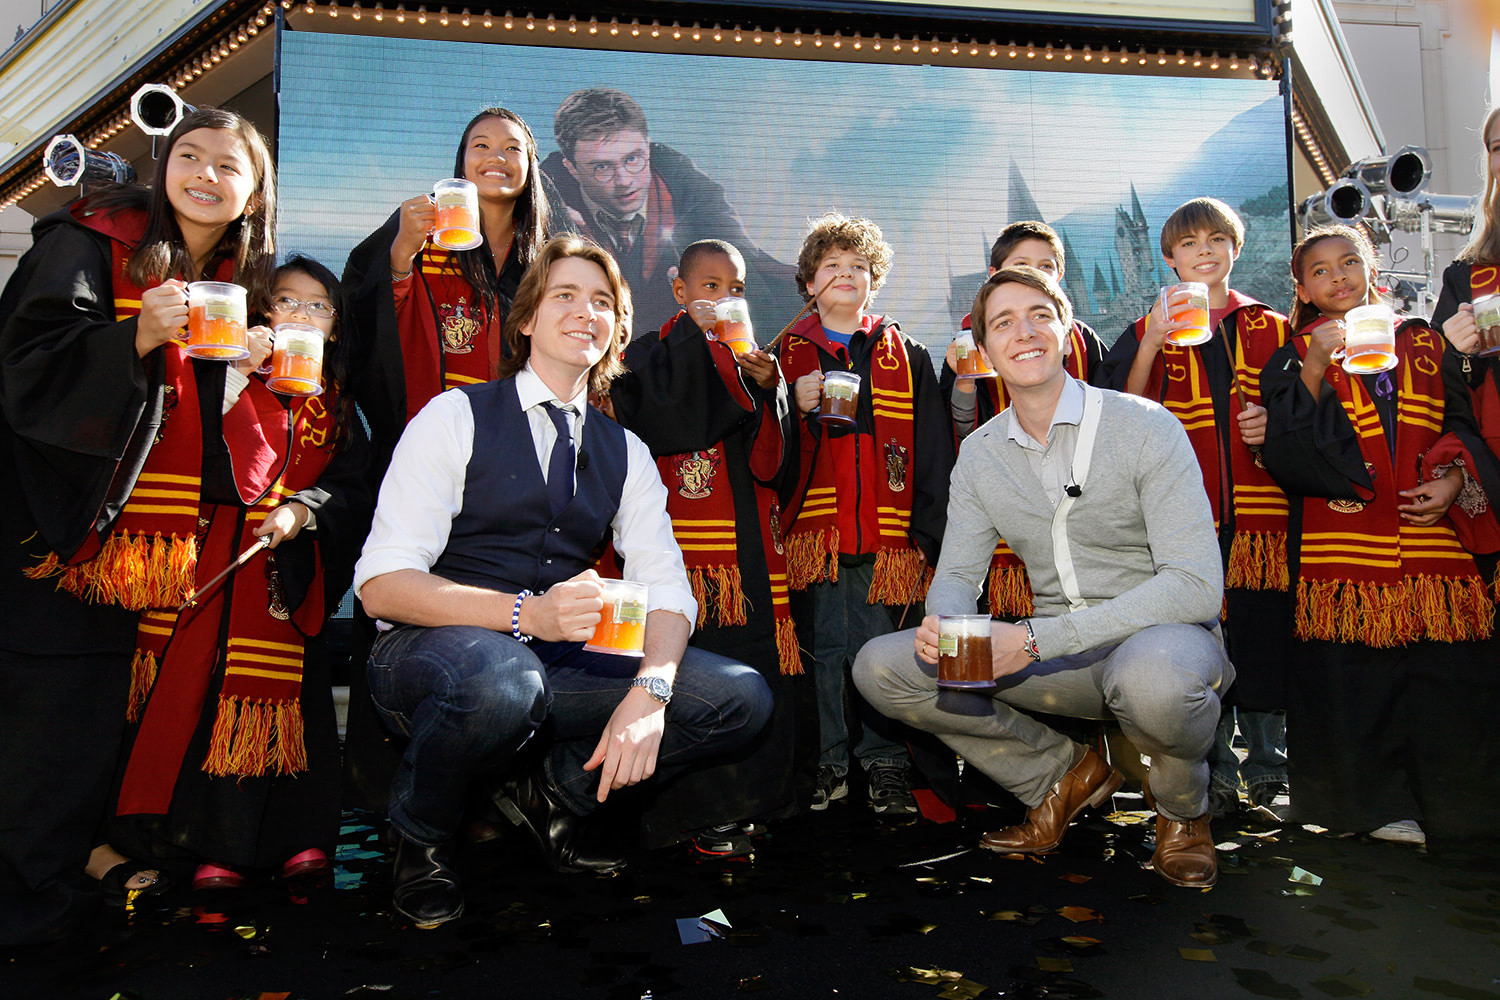 ‘Wizarding World of Harry Potter’ Hollywood announcement